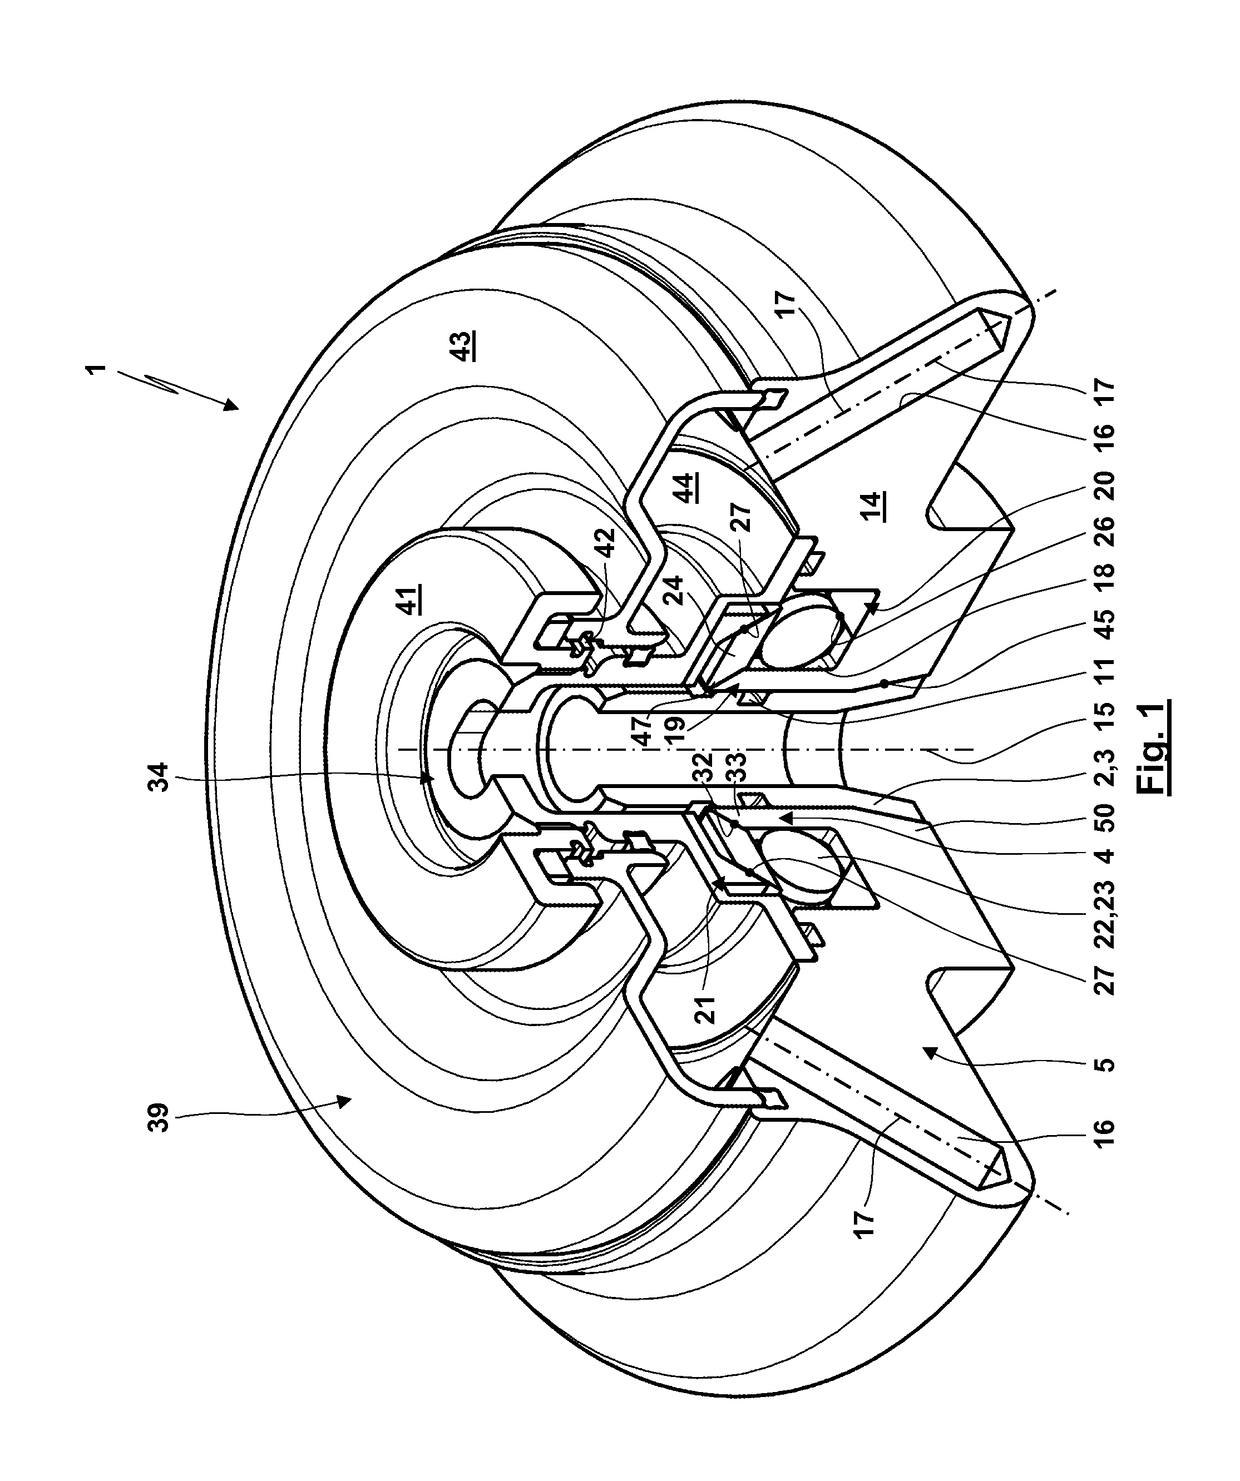 Coupling device for a laboratory centrifuge actuated by centrifugal force